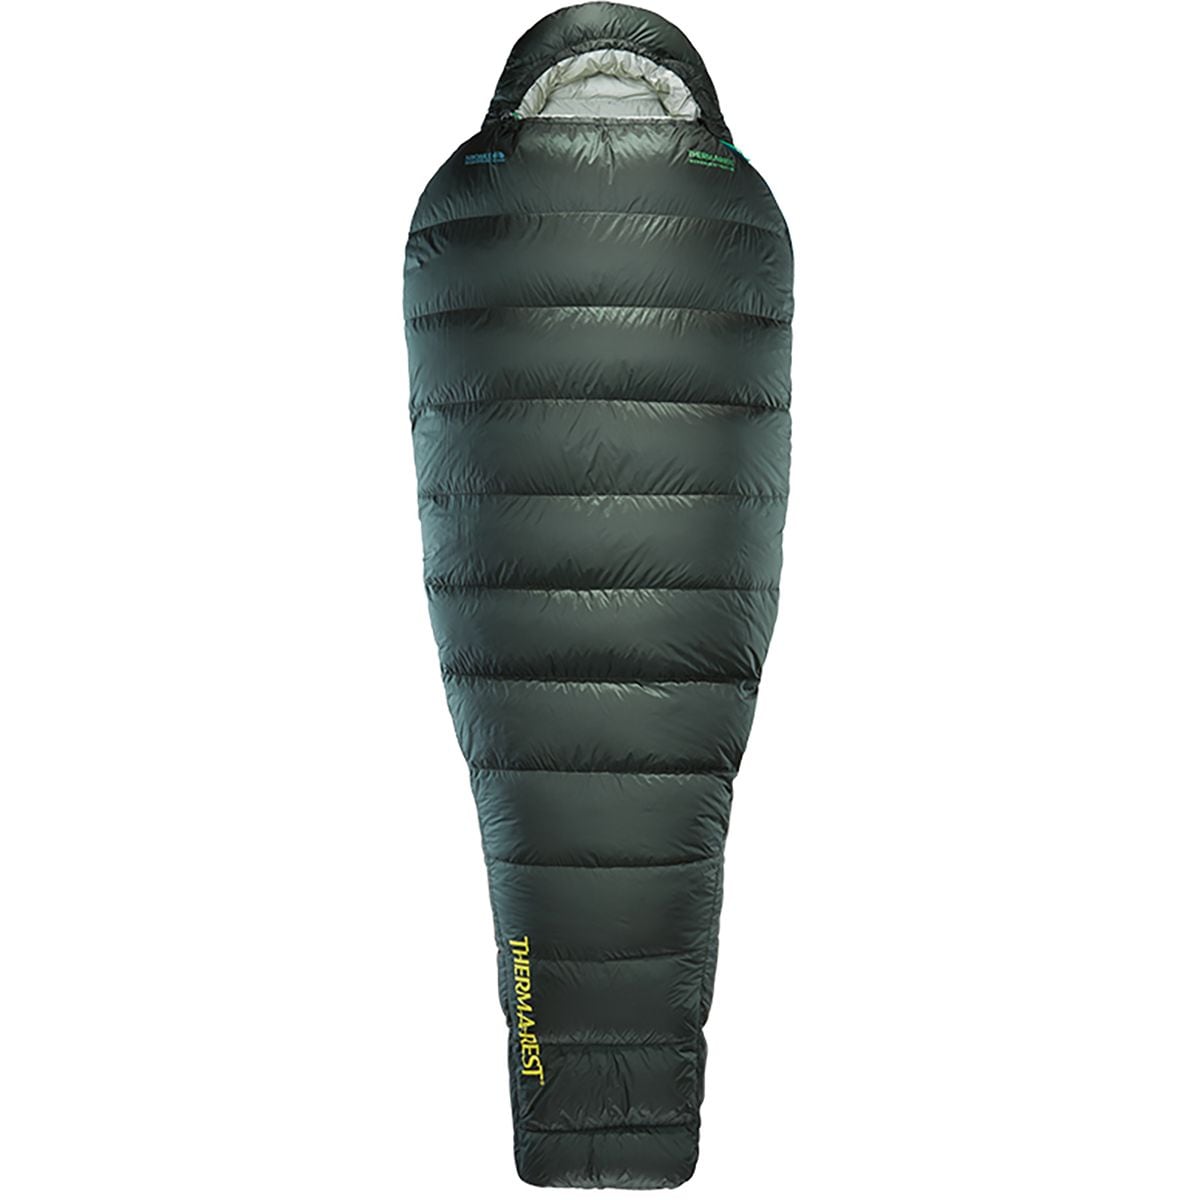 Therm-a-Rest Hyperion Sleeping Bag: 32F Down - Hike & Camp